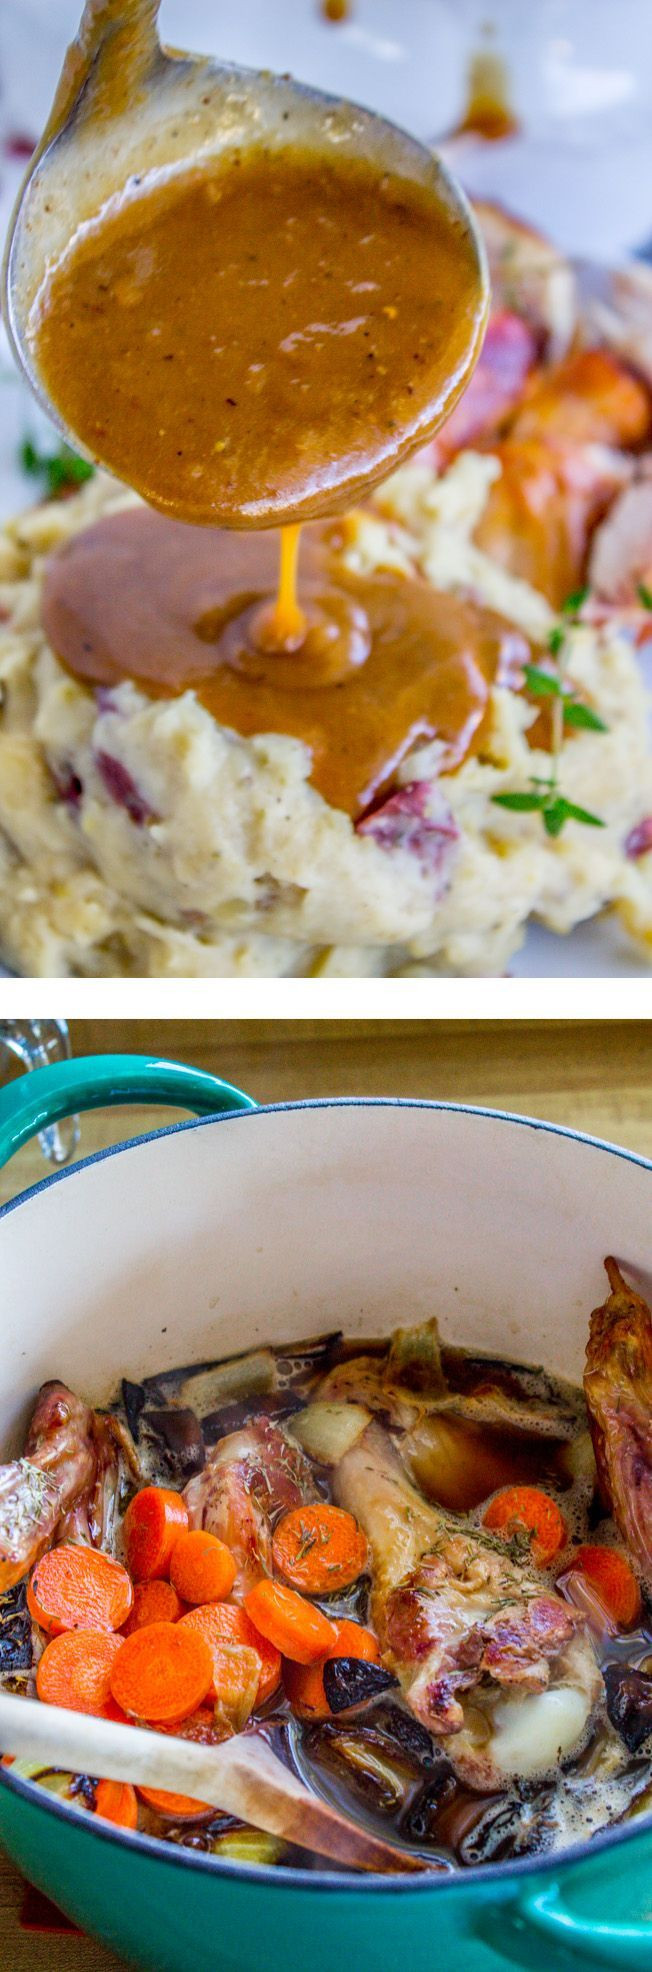 Make Ahead Thanksgiving Turkey
 This make ahead and freeze gravy is so easy and saves